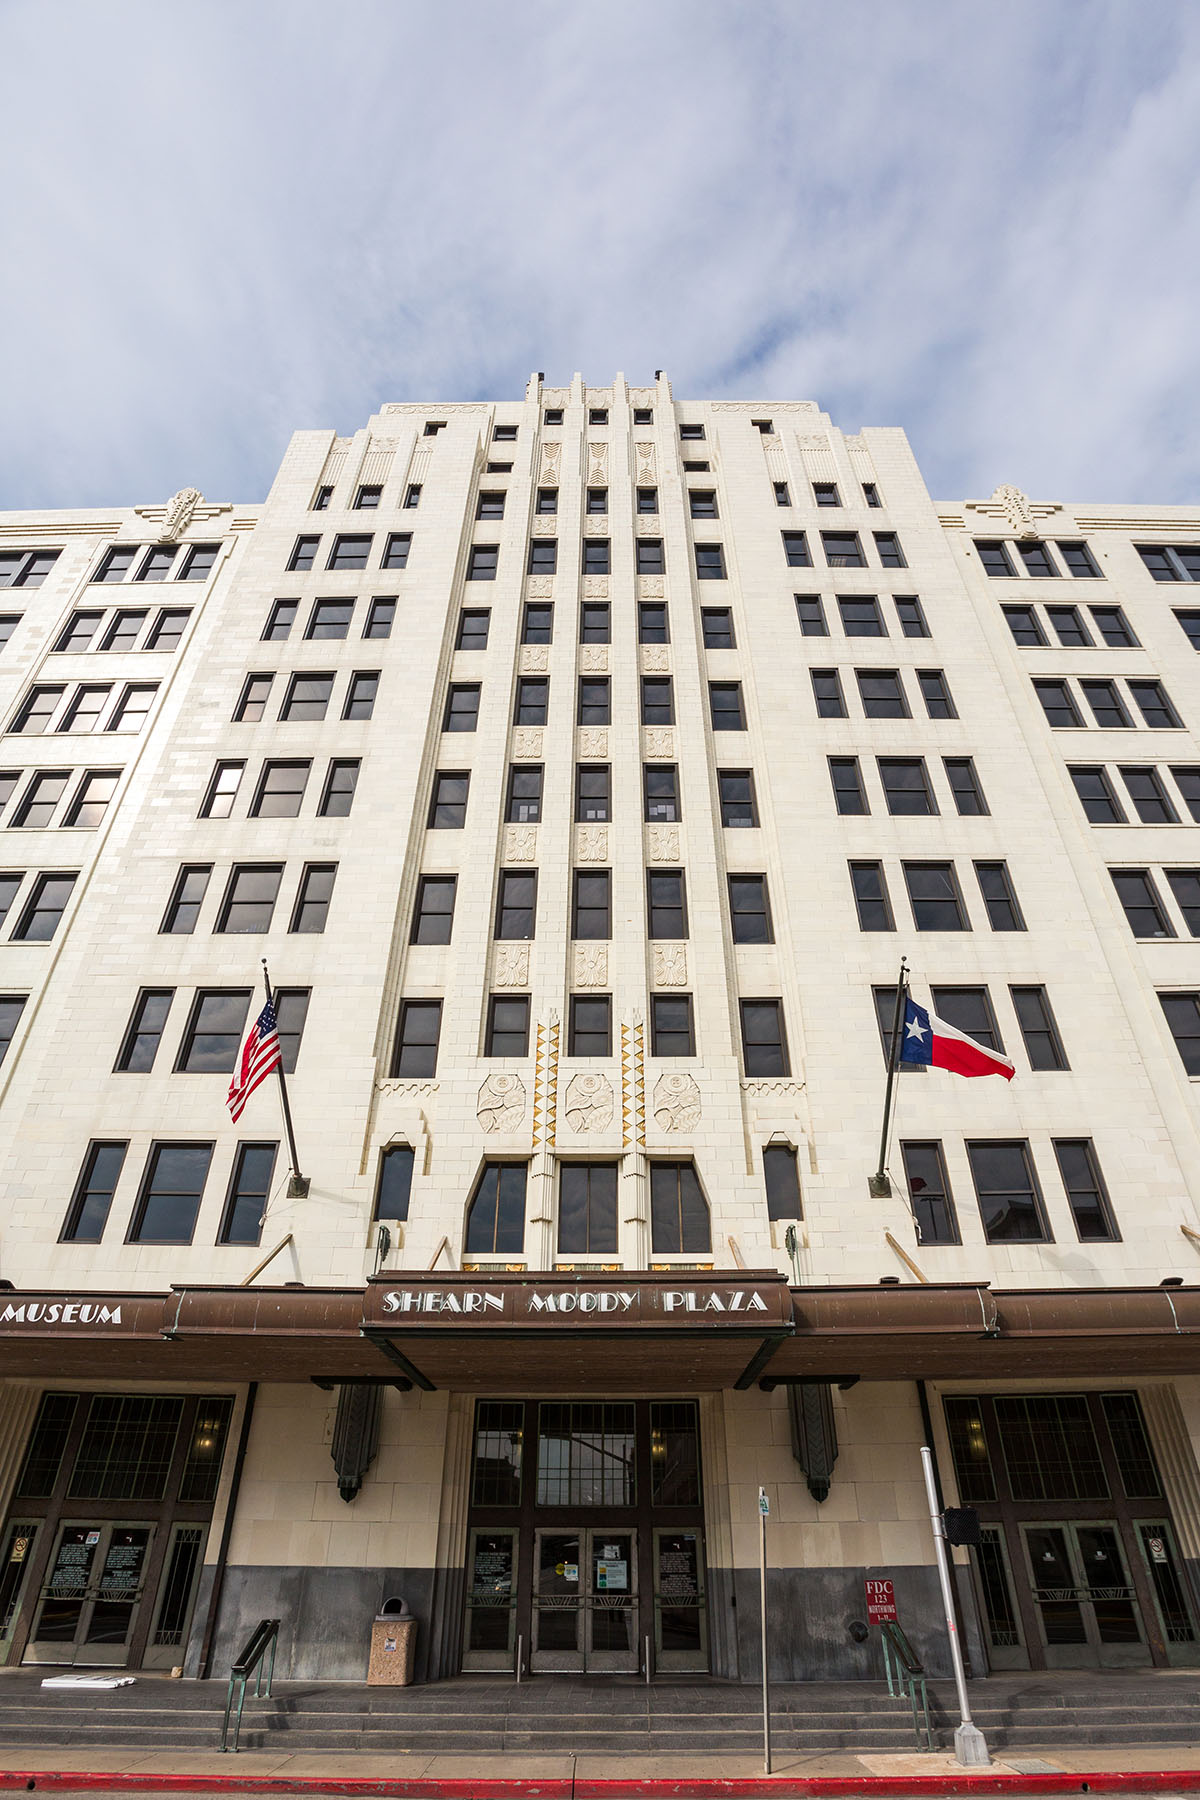 The outside of a tall, white building with a U.S. and Texas flag and a sign reading "Shearn Moody Plaza"